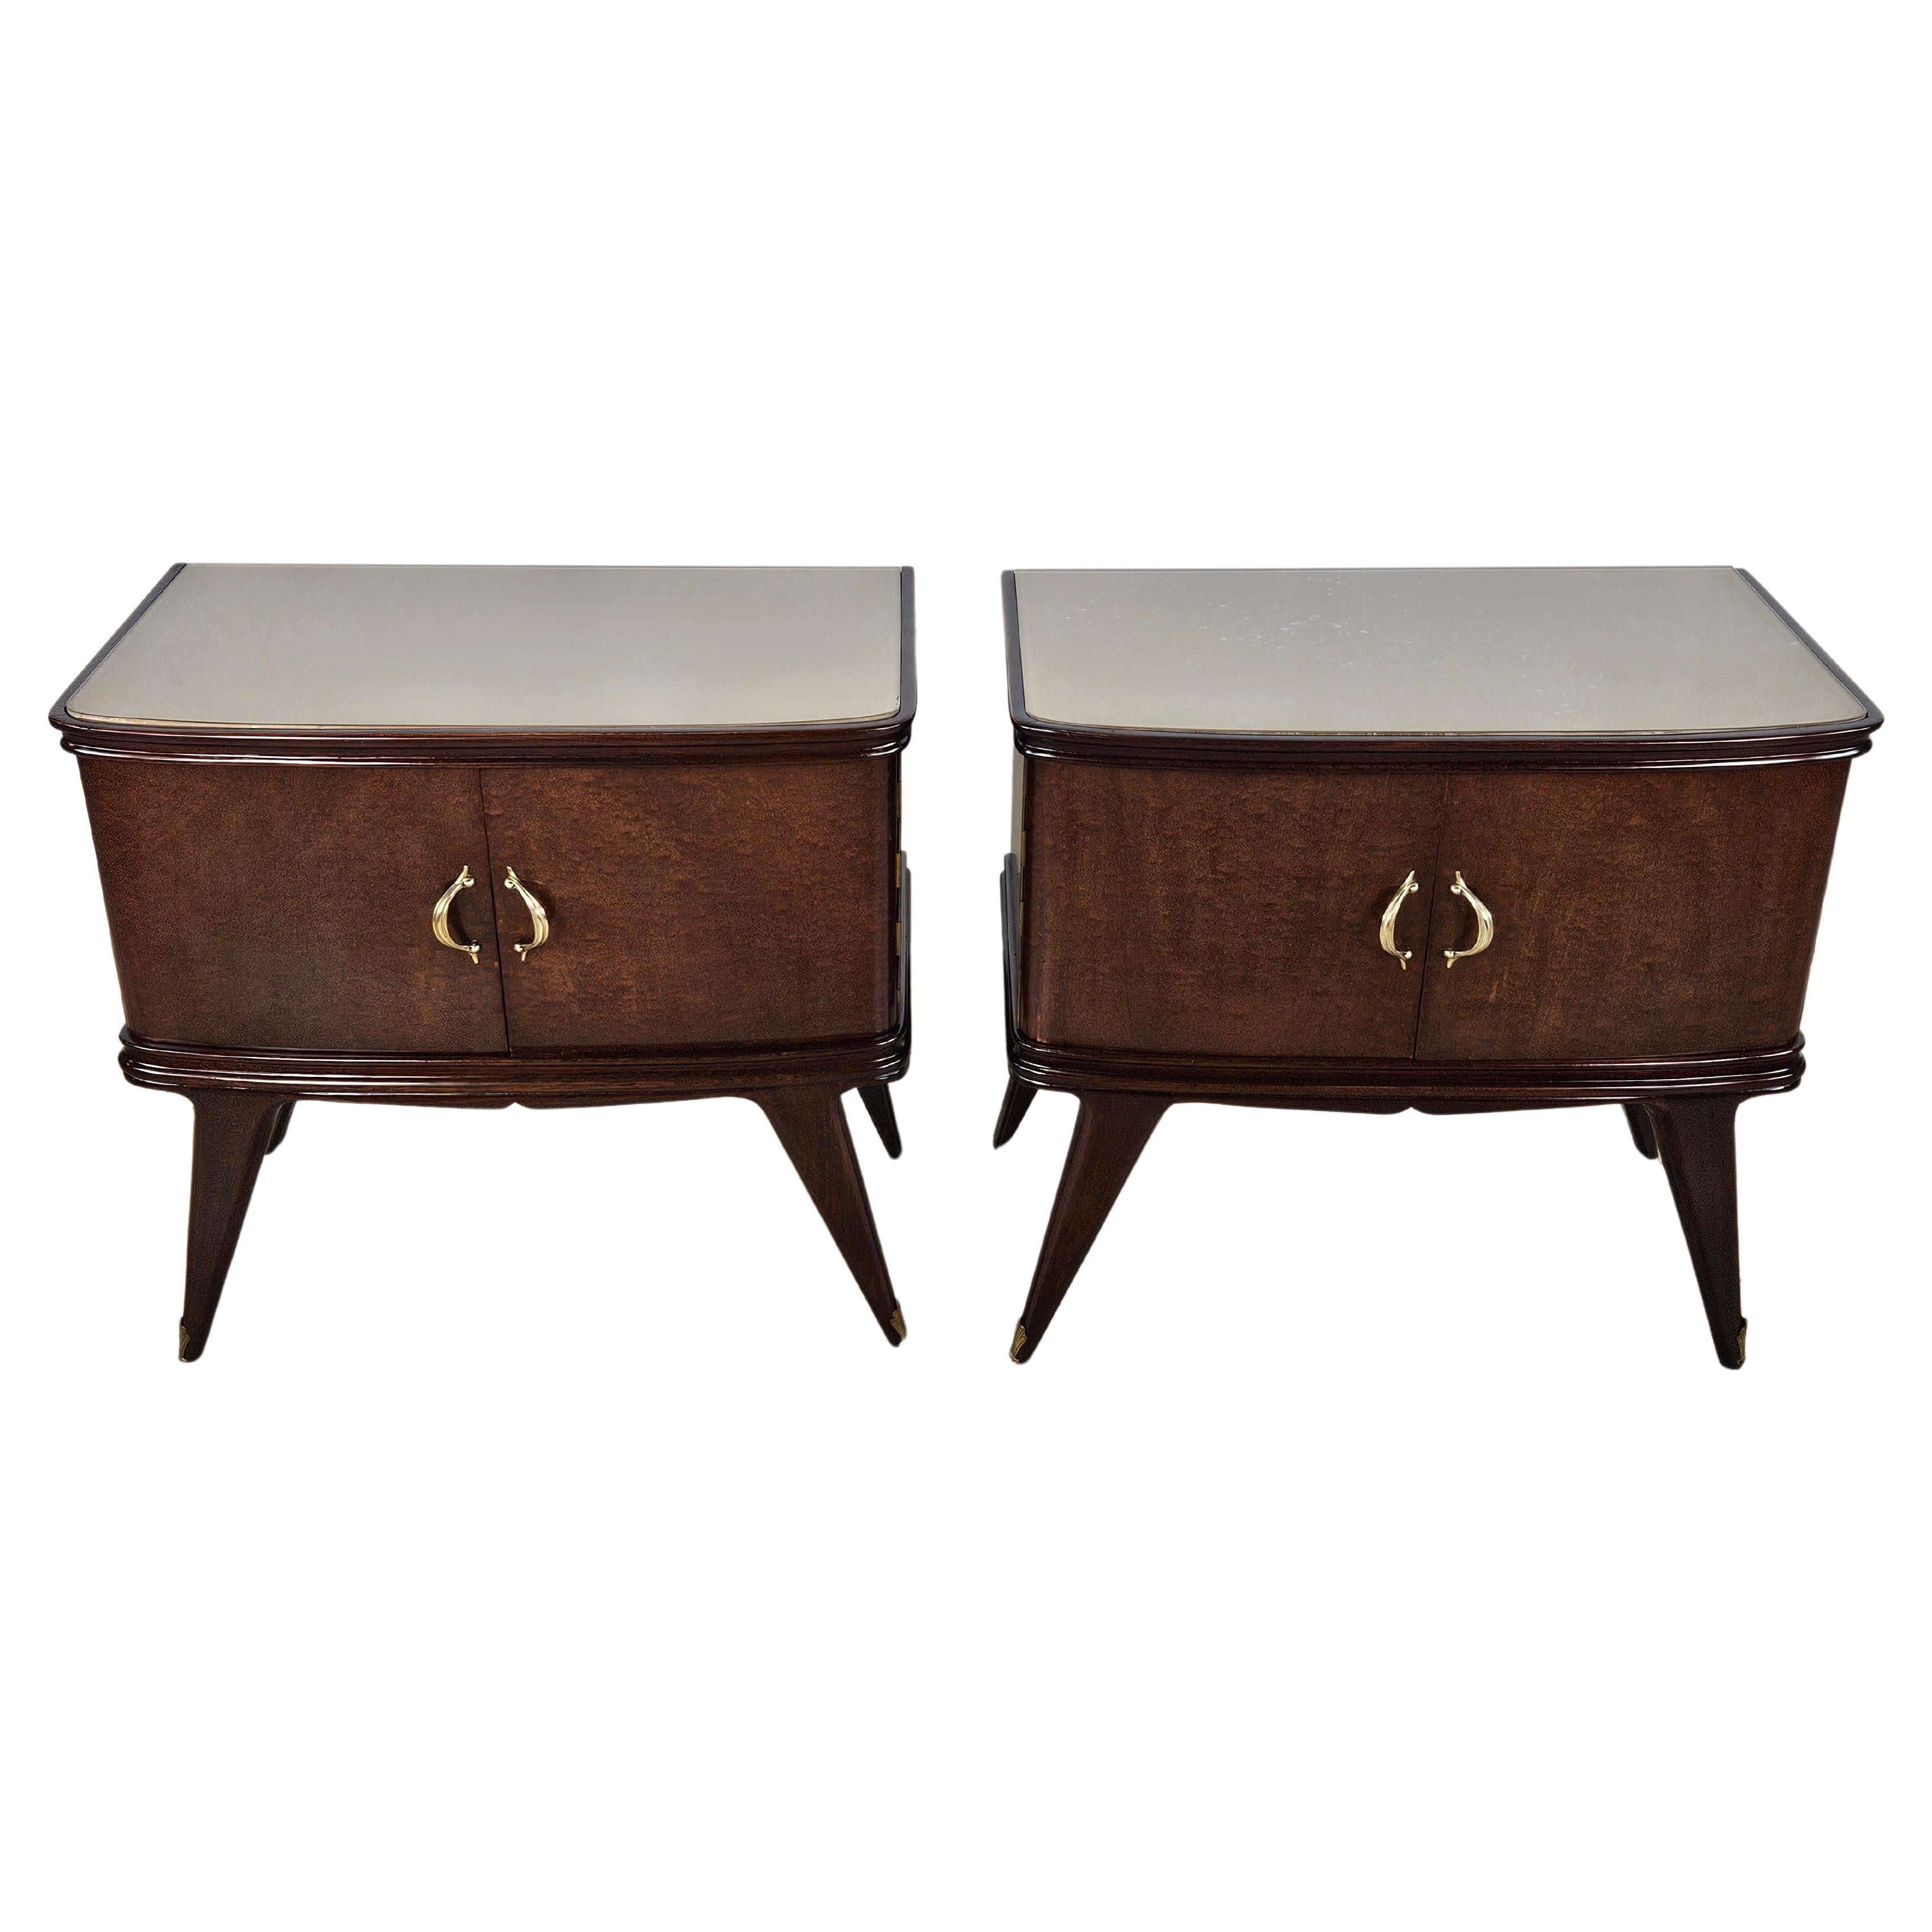 1950s mahogany feather bedside tables with brown glass and brass handles For Sale